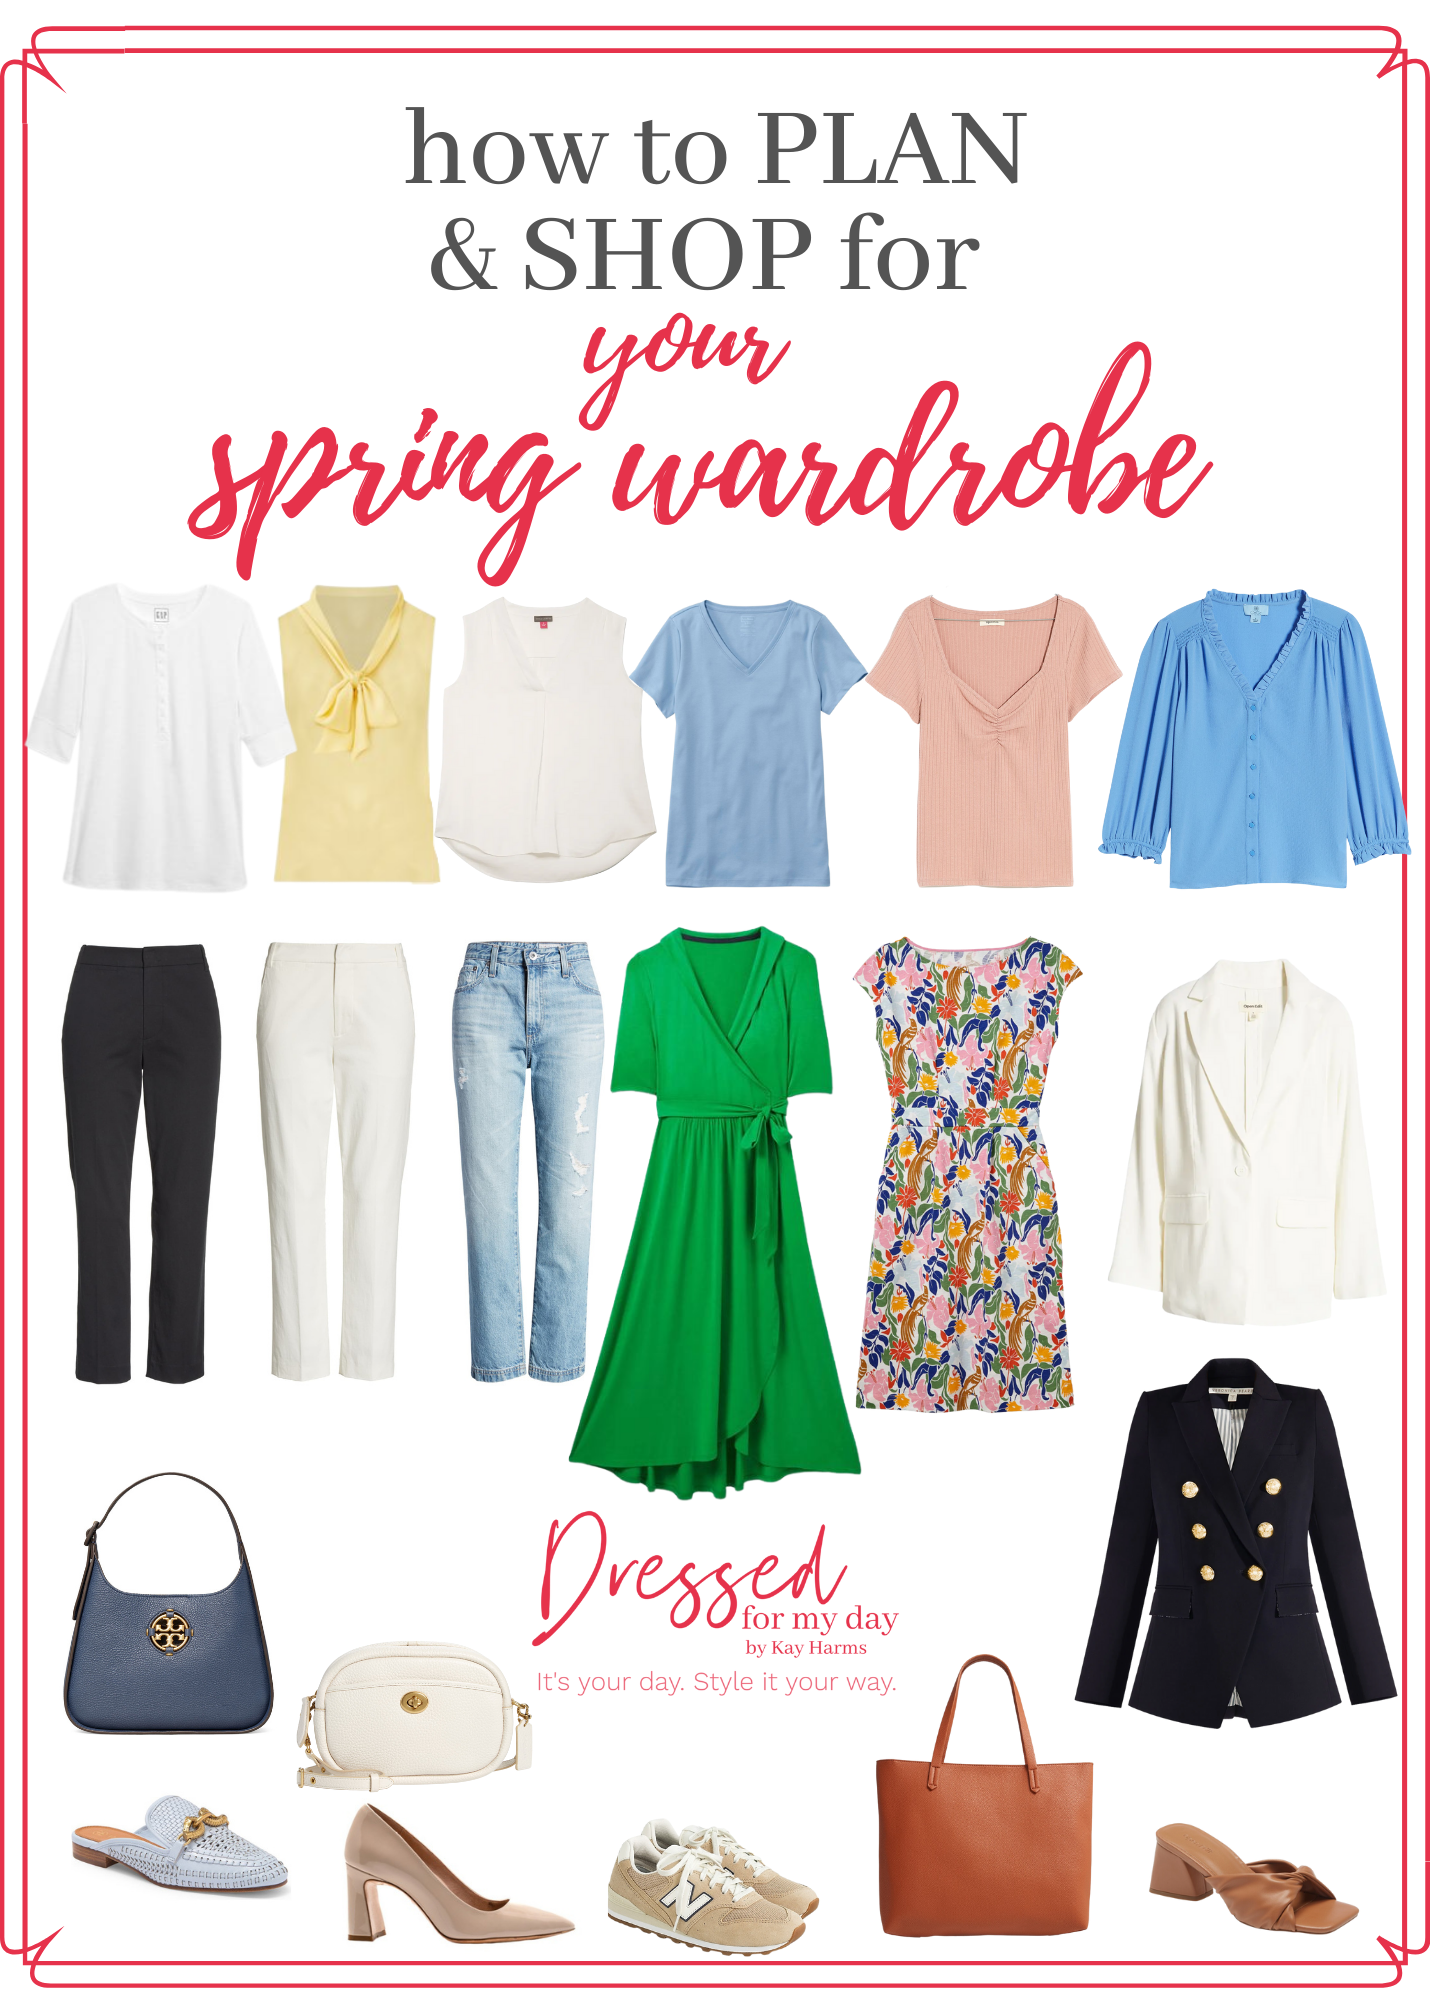 How to Plan and Shop for Your Spring Wardrobe